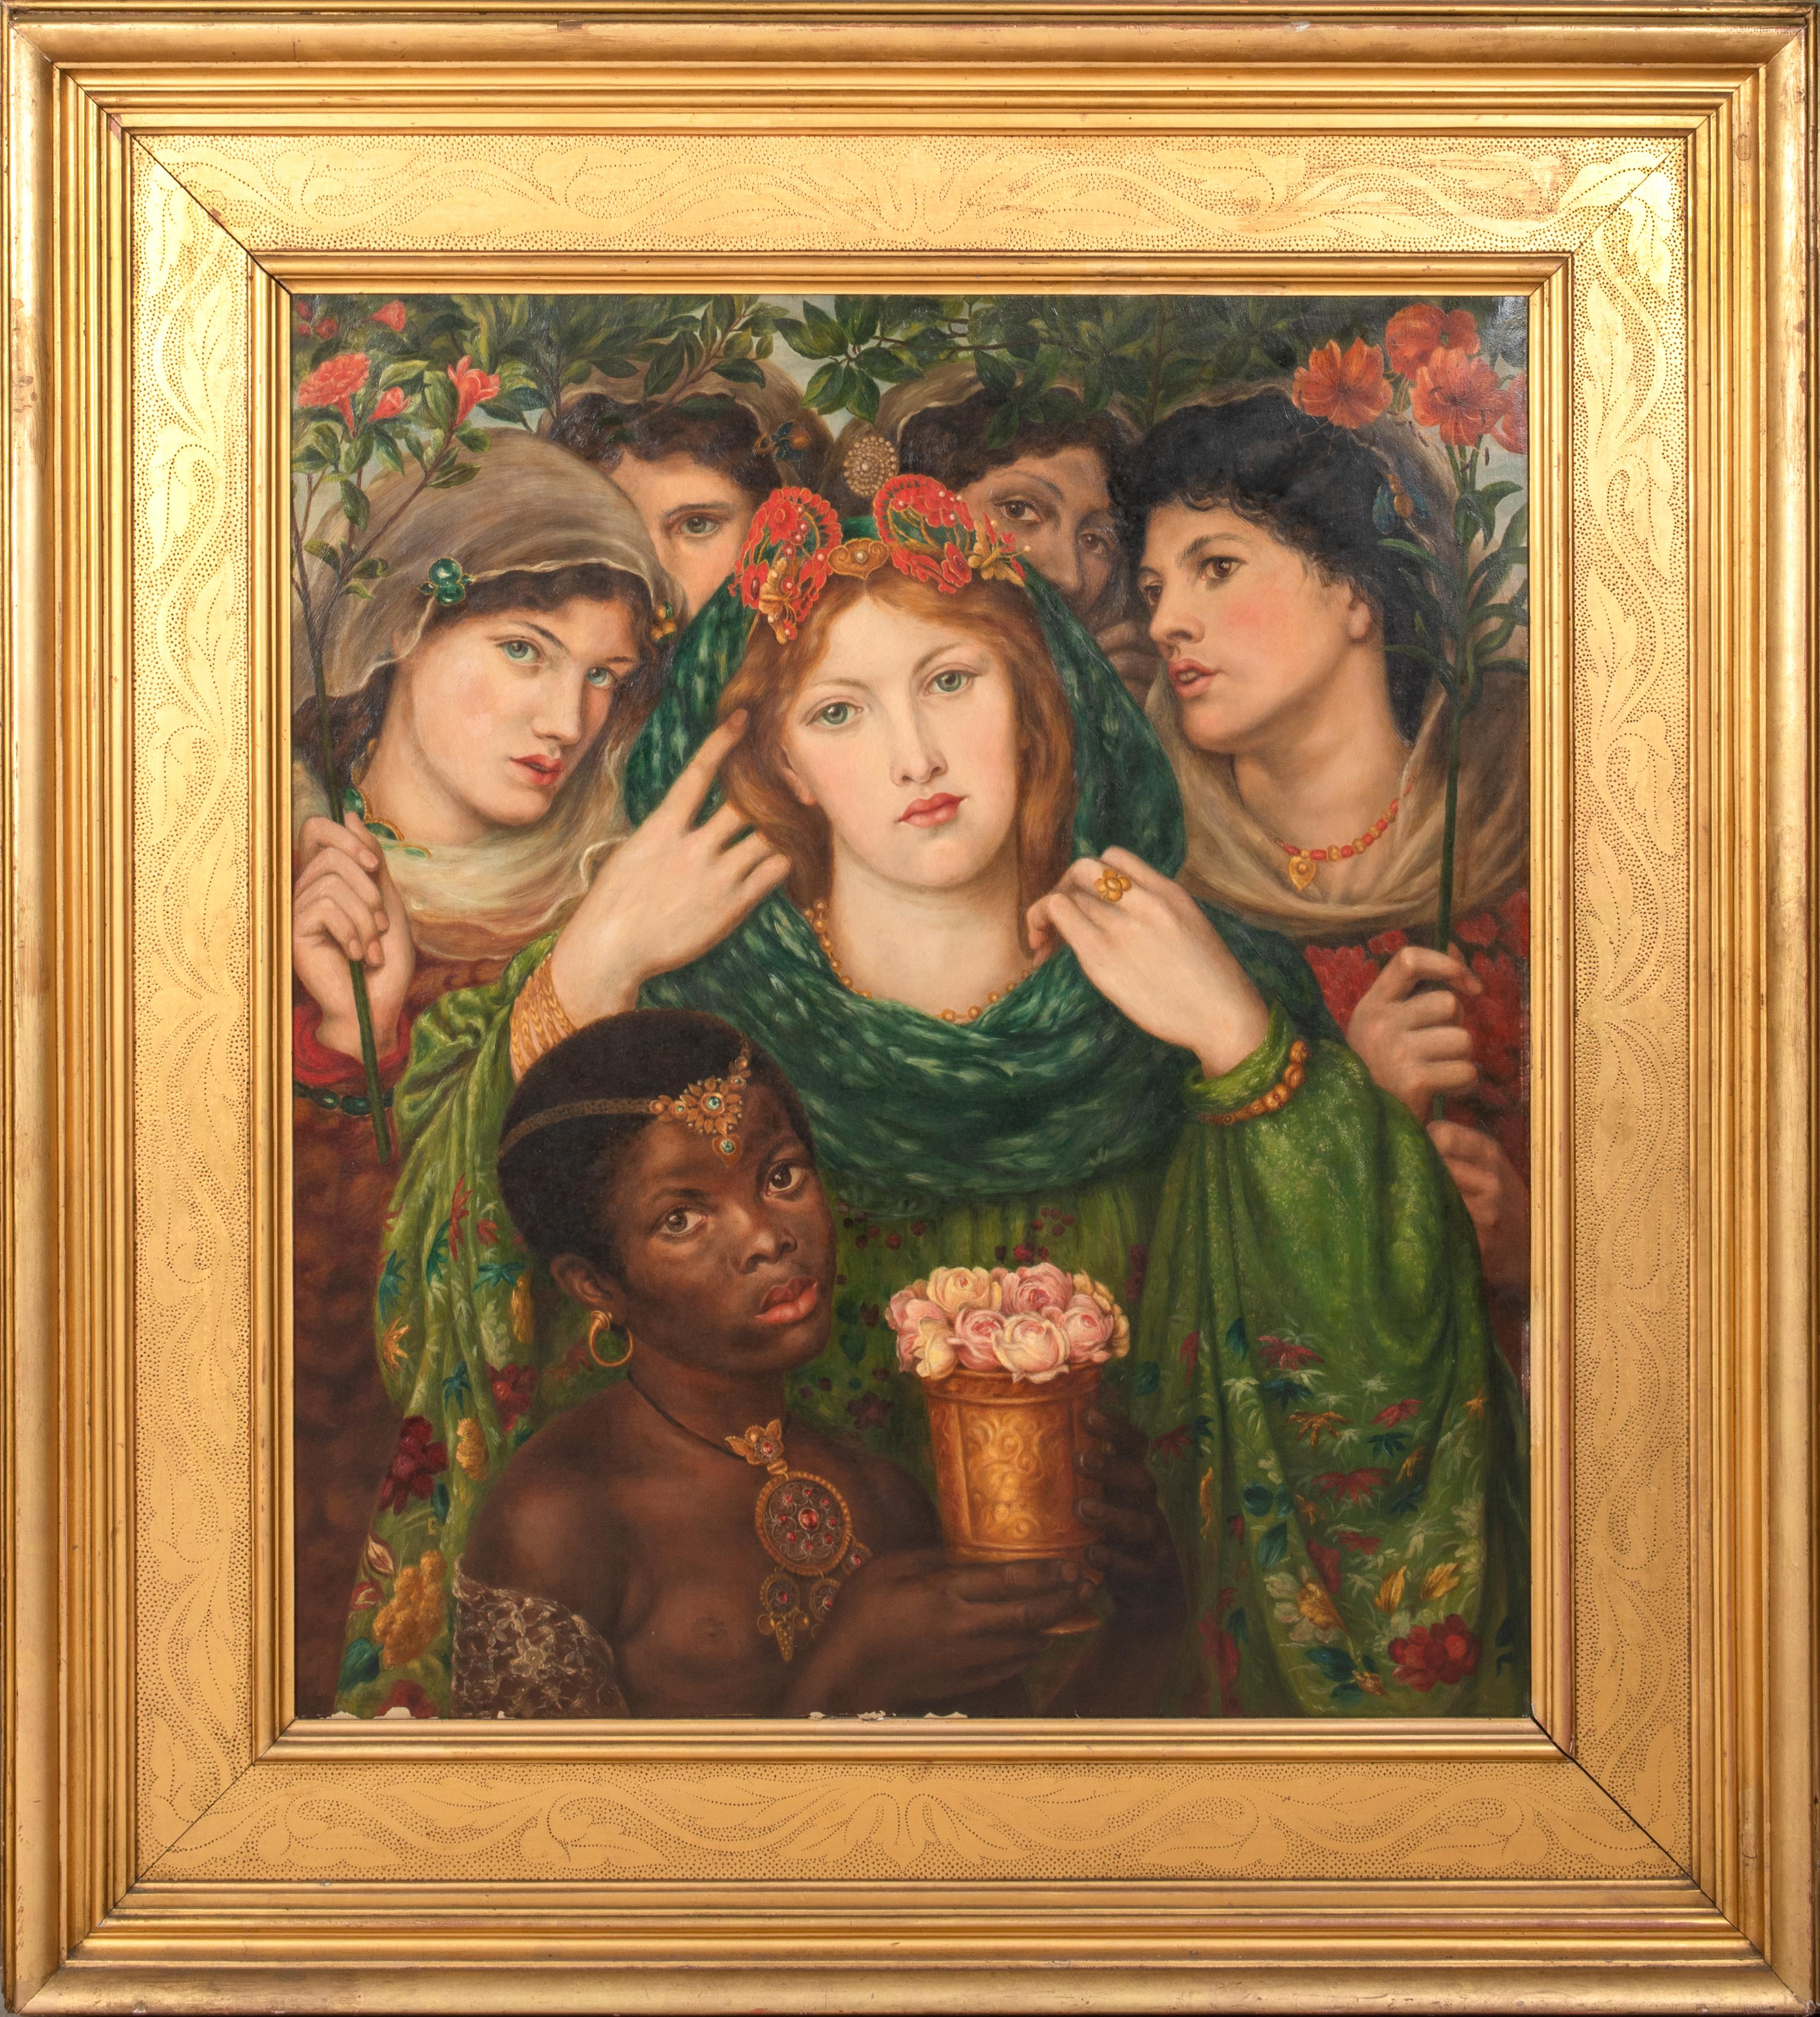 the beloved rossetti